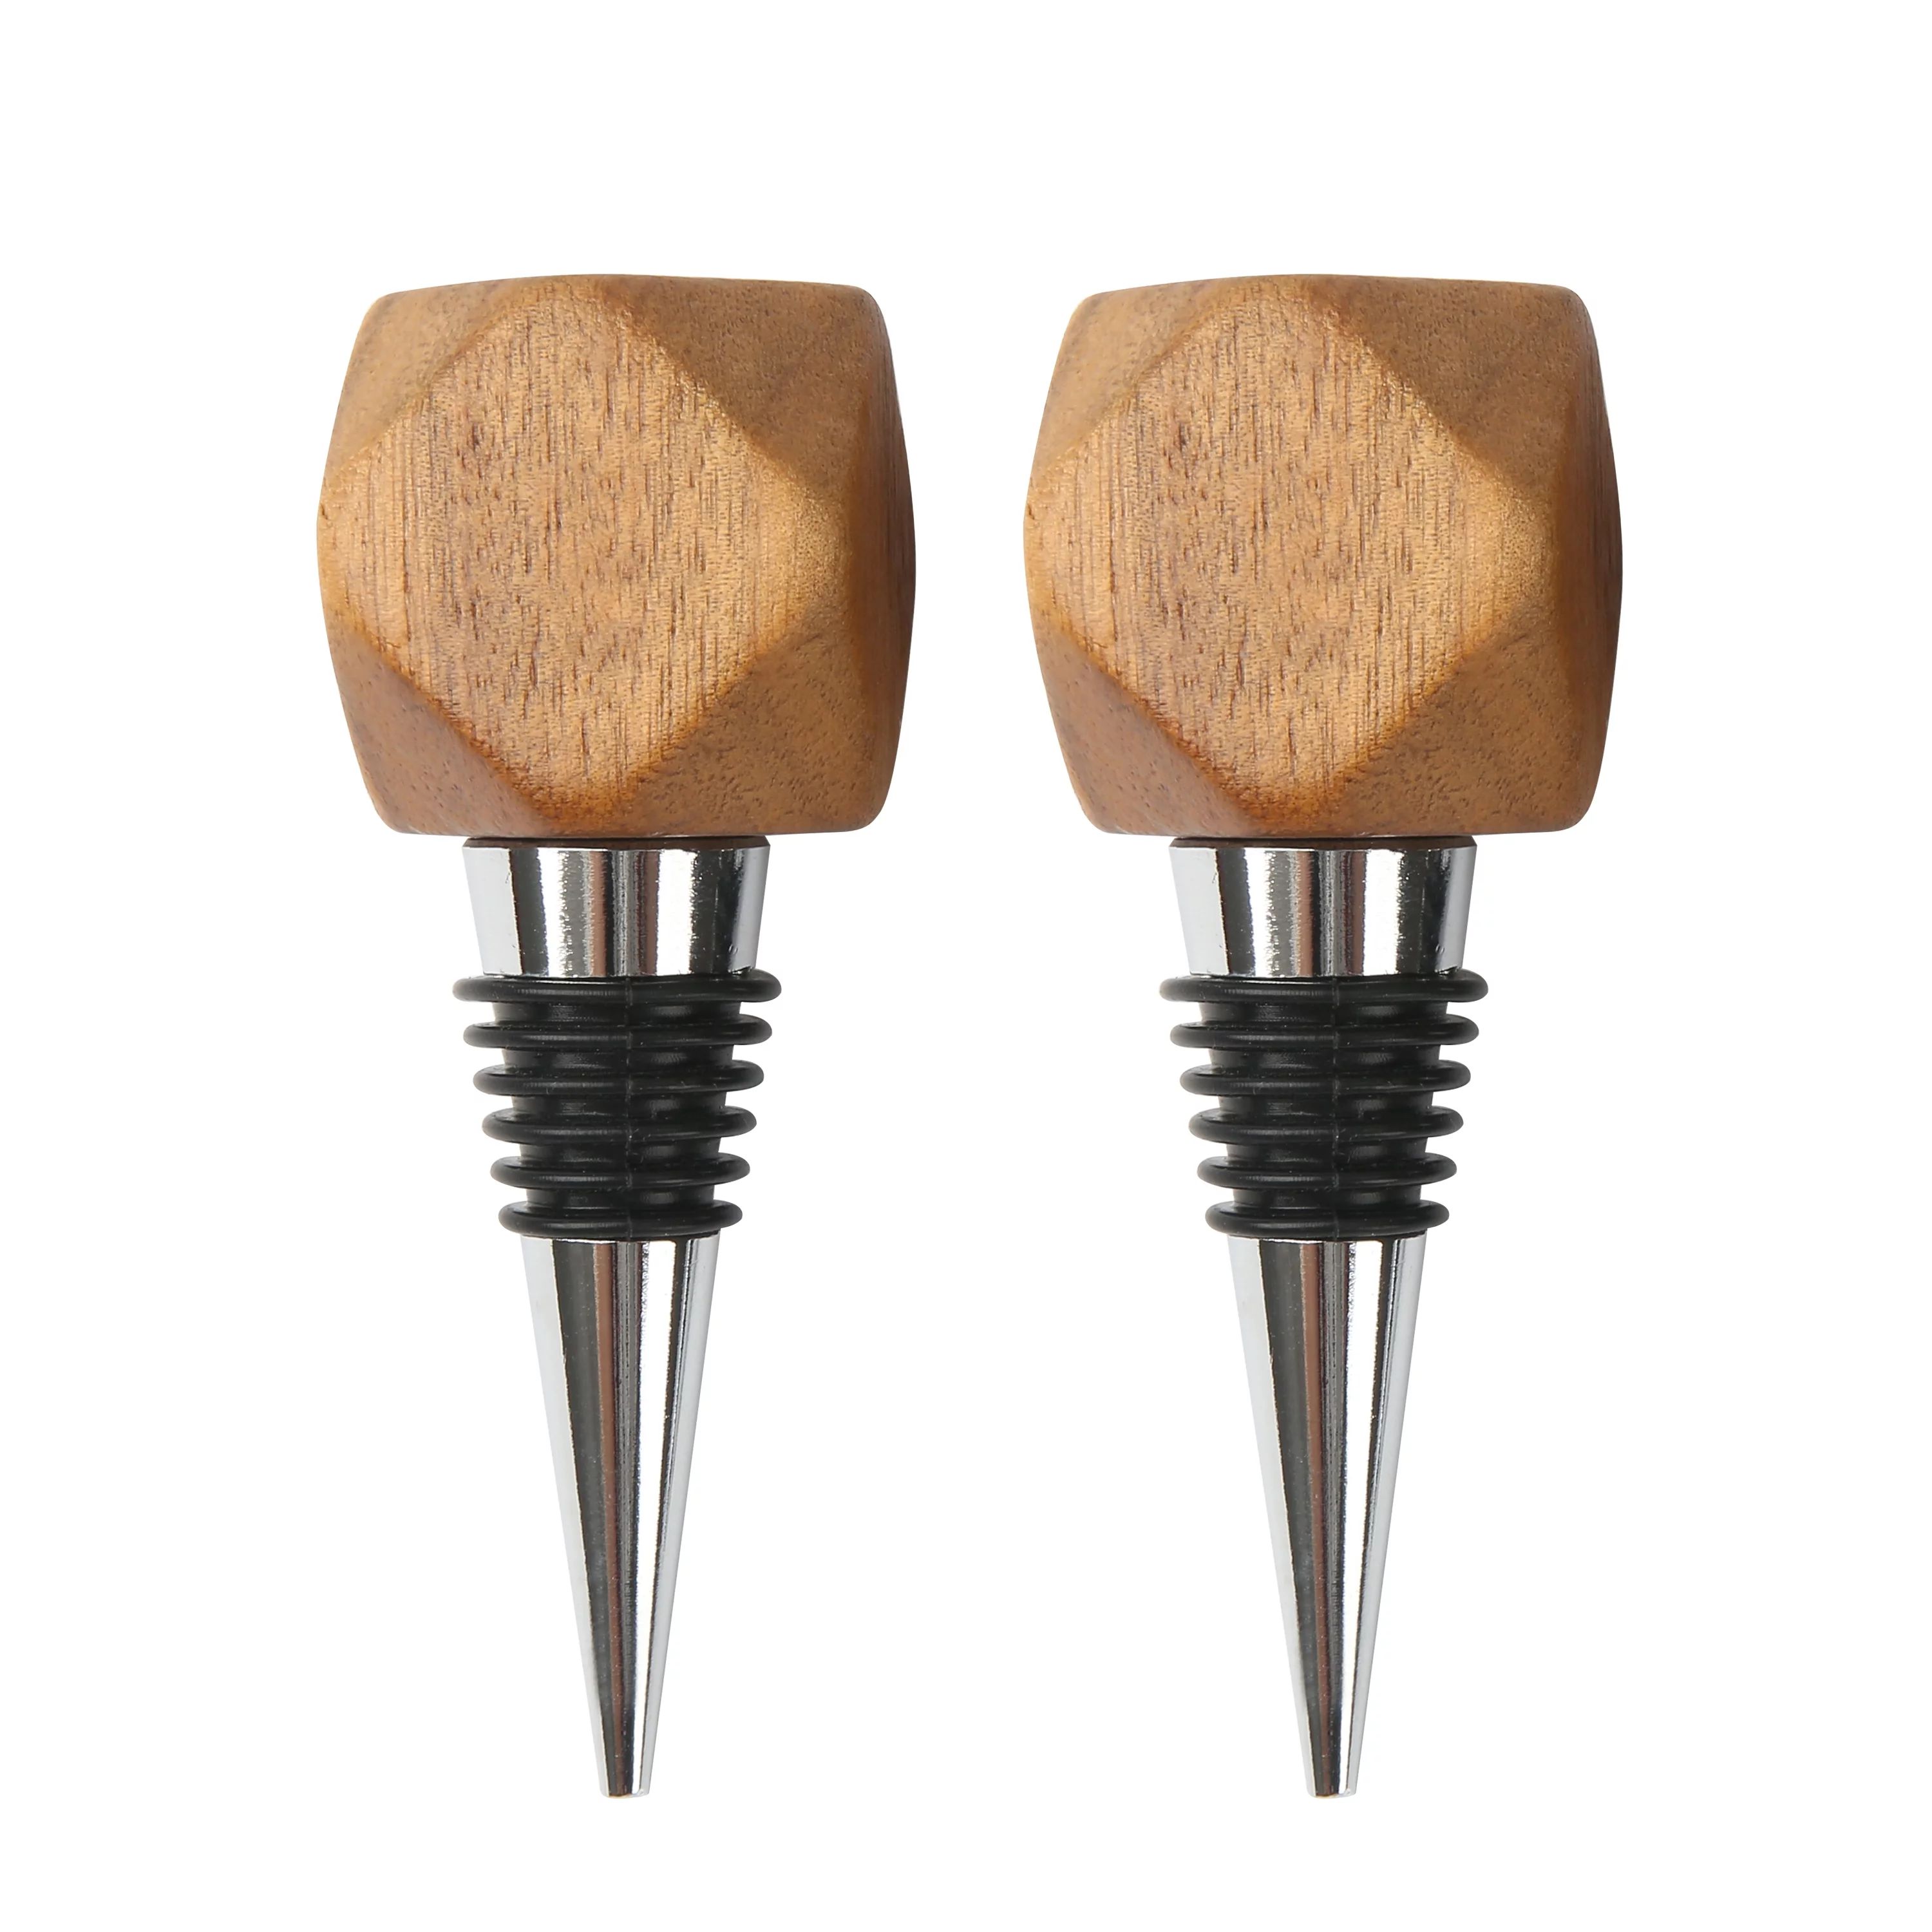 Better Homes & Gardens Elegant Wine Bottle Stopper Aluminum and Wood, Brown and Silver 3.93" | Walmart (US)